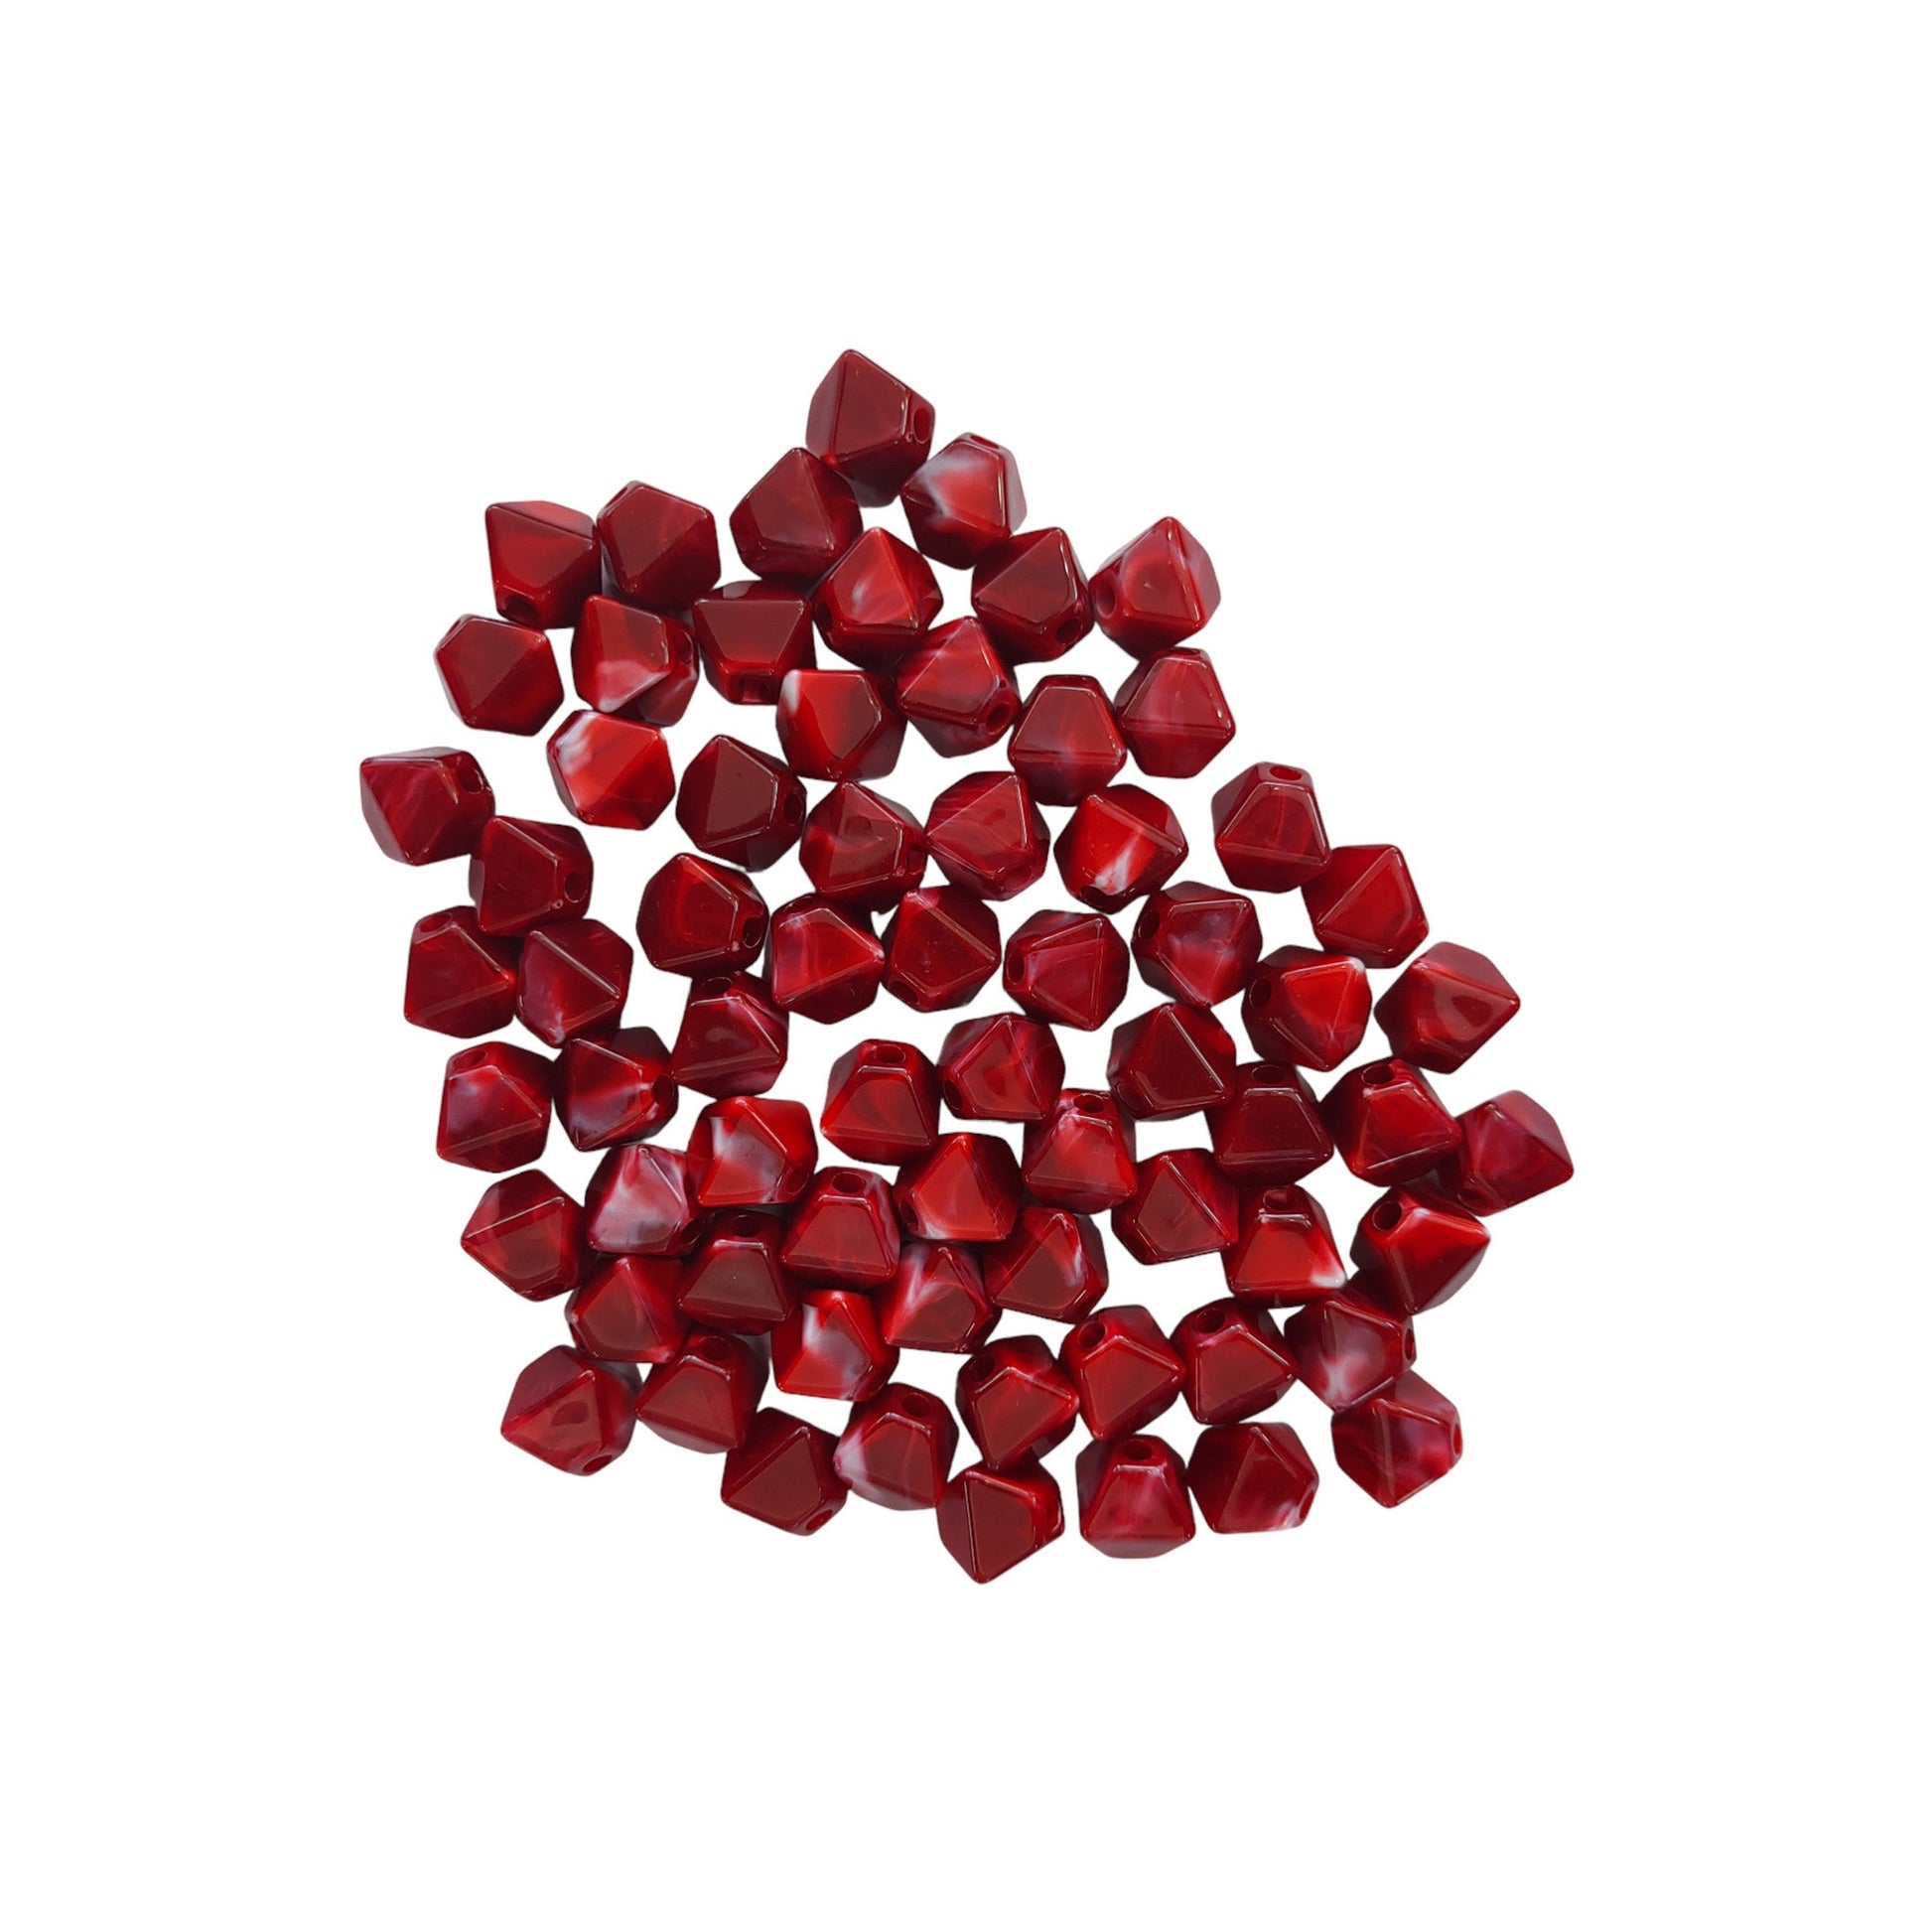 Indian Petals Square Shaped Resin Color Marble Beads Ideal for Jewelry designing and Craft Making or Decor